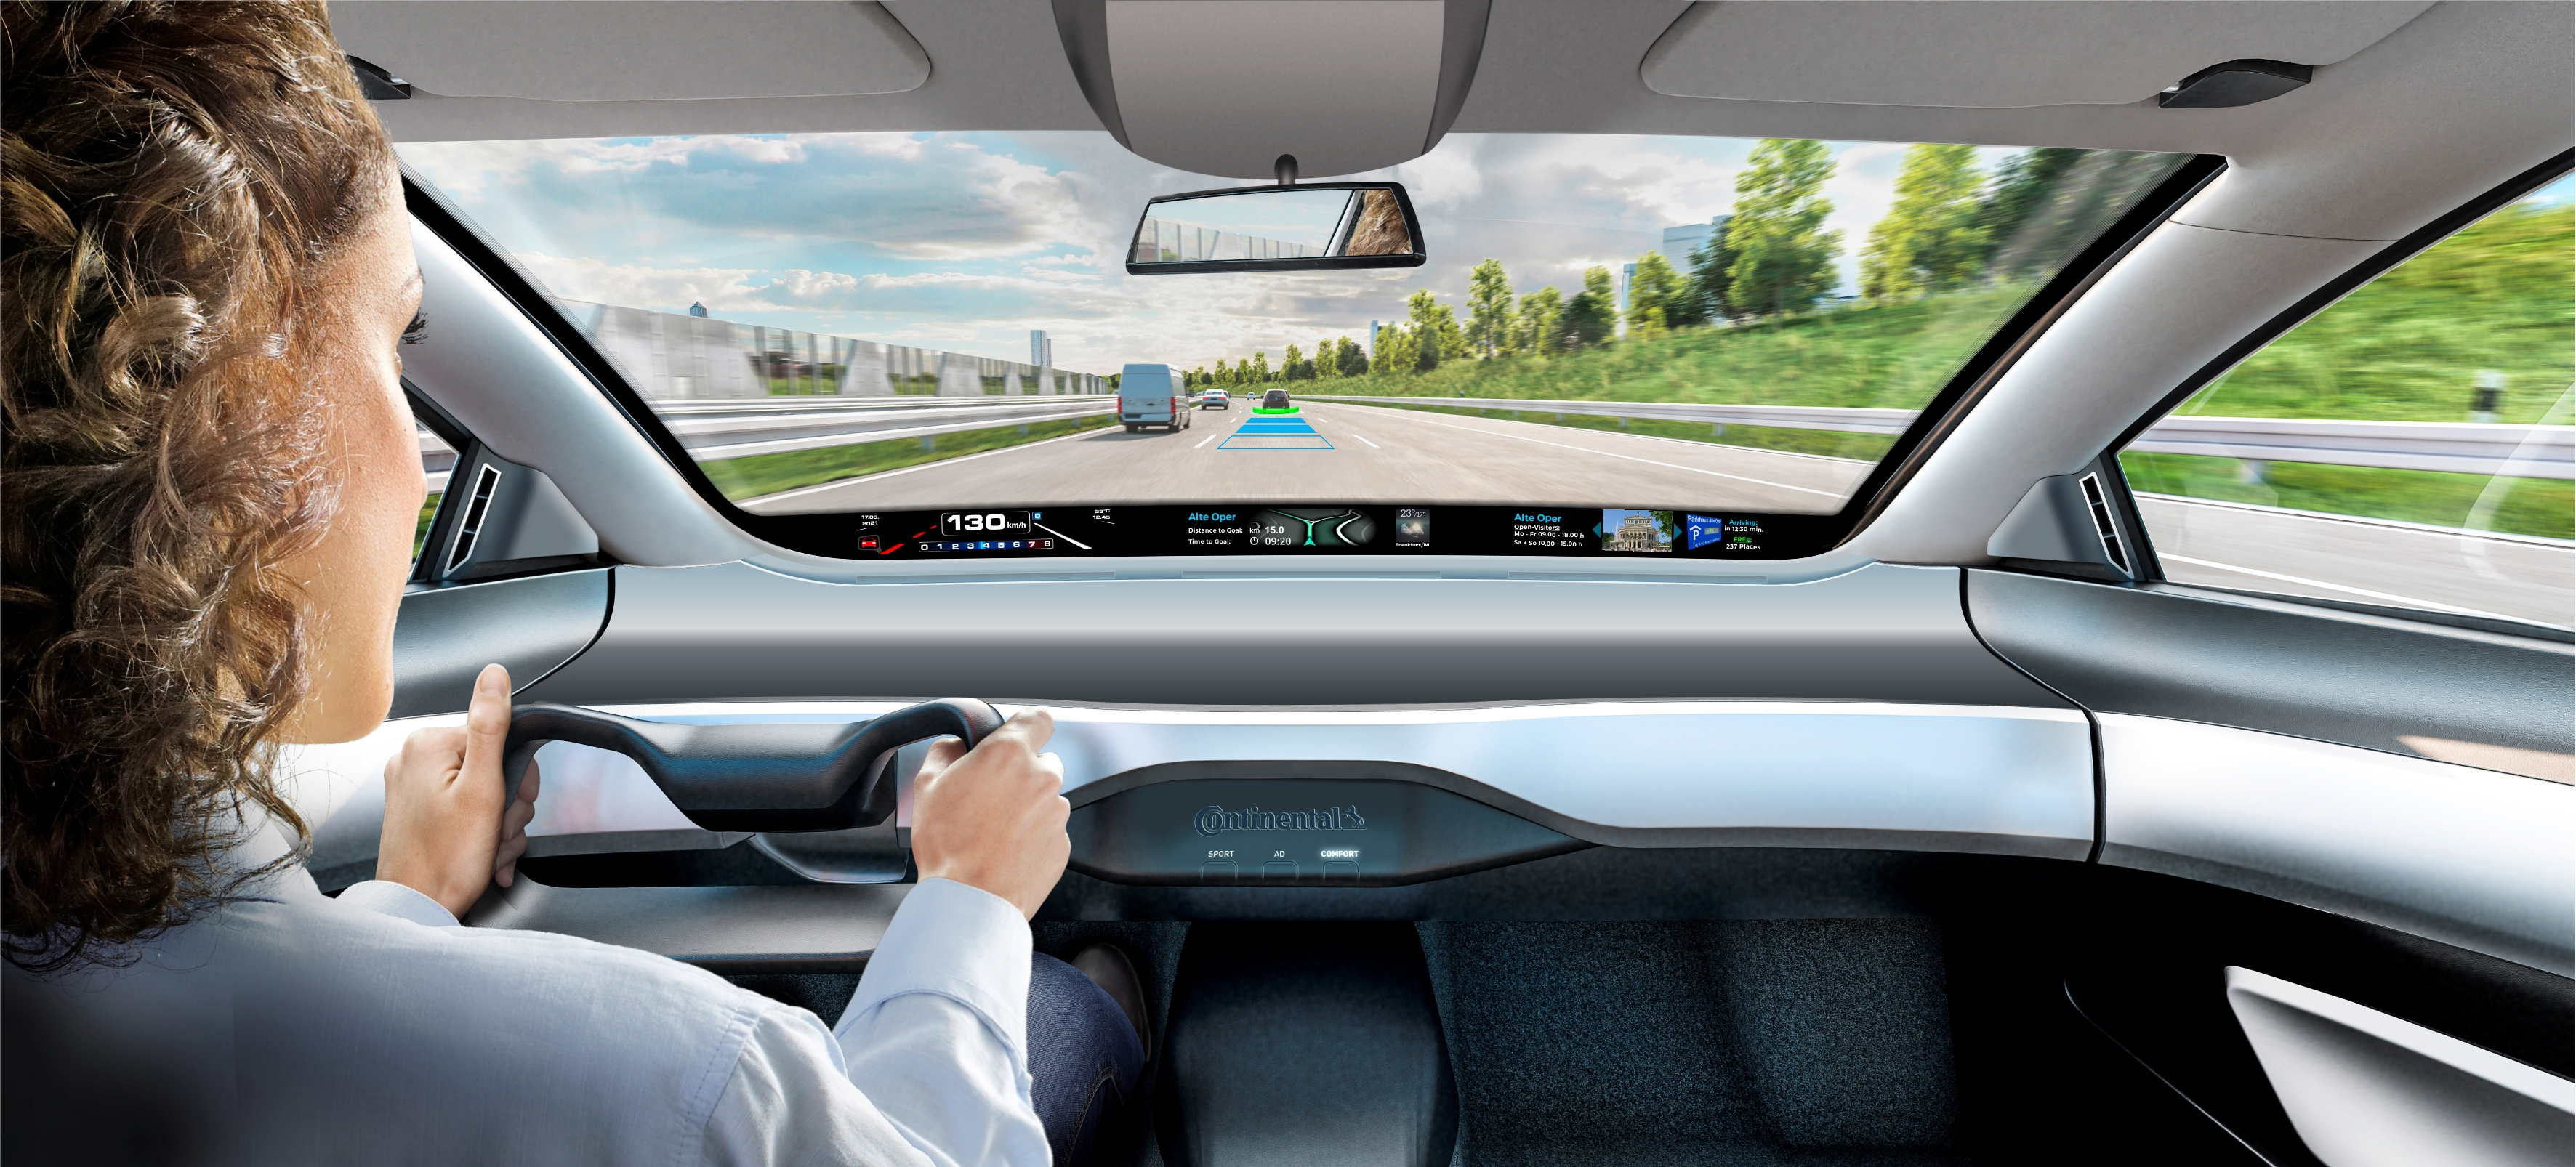 Continental's Scenic View Head-Up Display Named CES® 2023 Innovation Award  Honoree